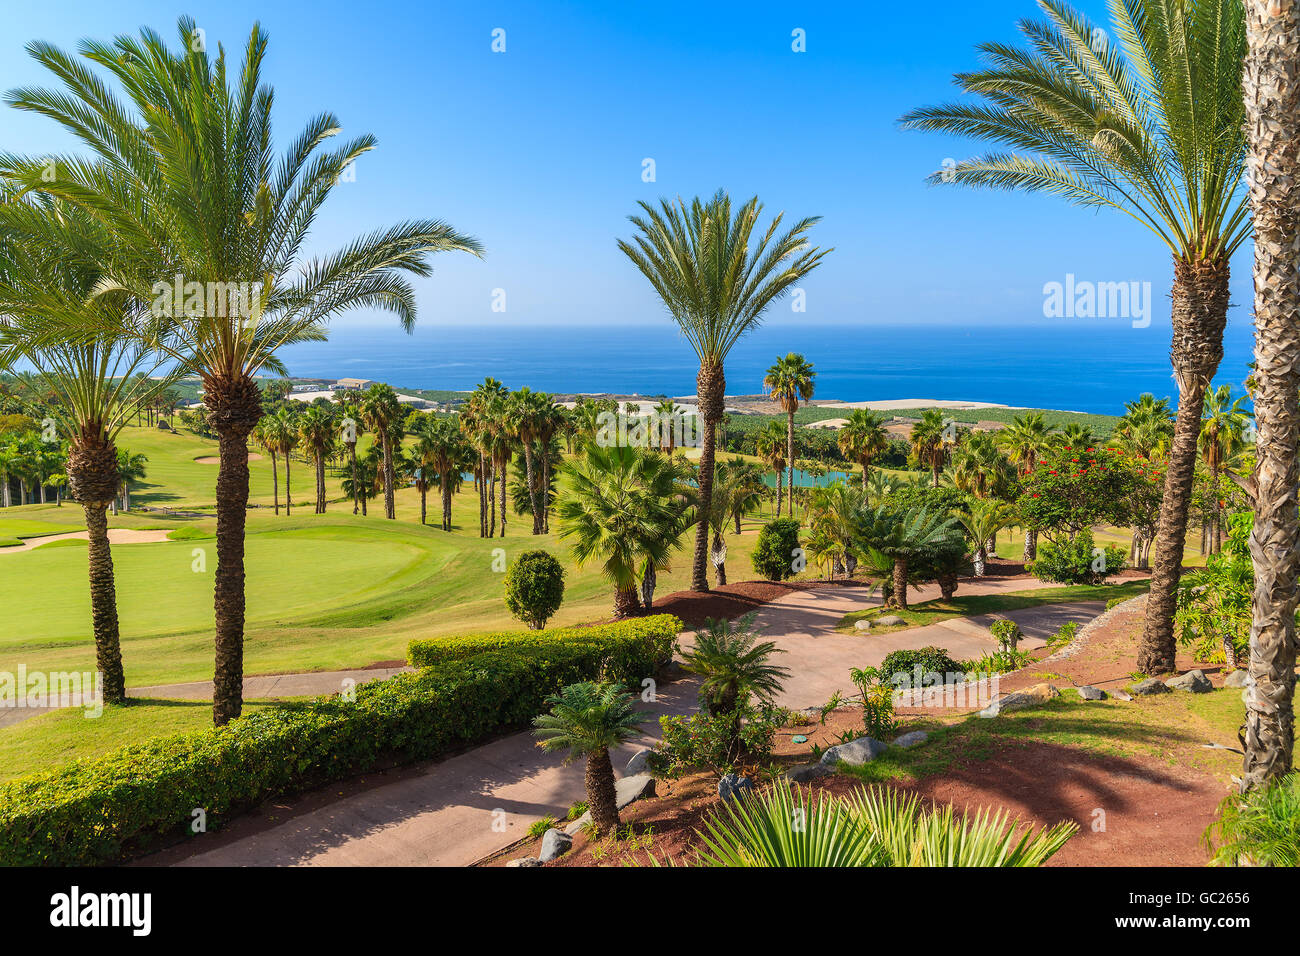 A view of tropical landscape with palm trees on Tenerife, Canary Islands, Spain Stock Photo